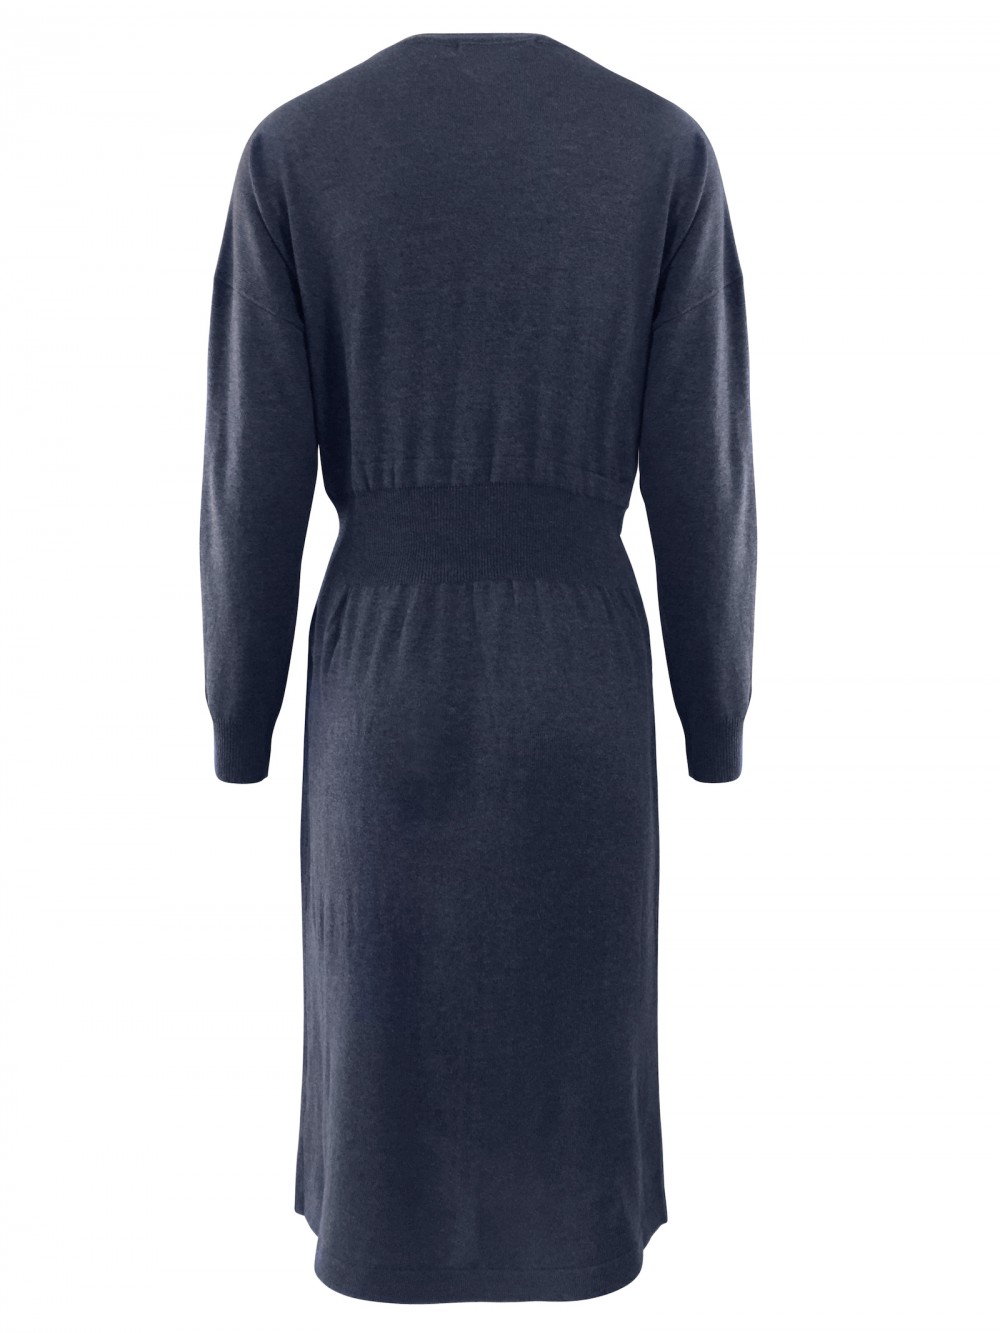 Knitted Dress COCO navy